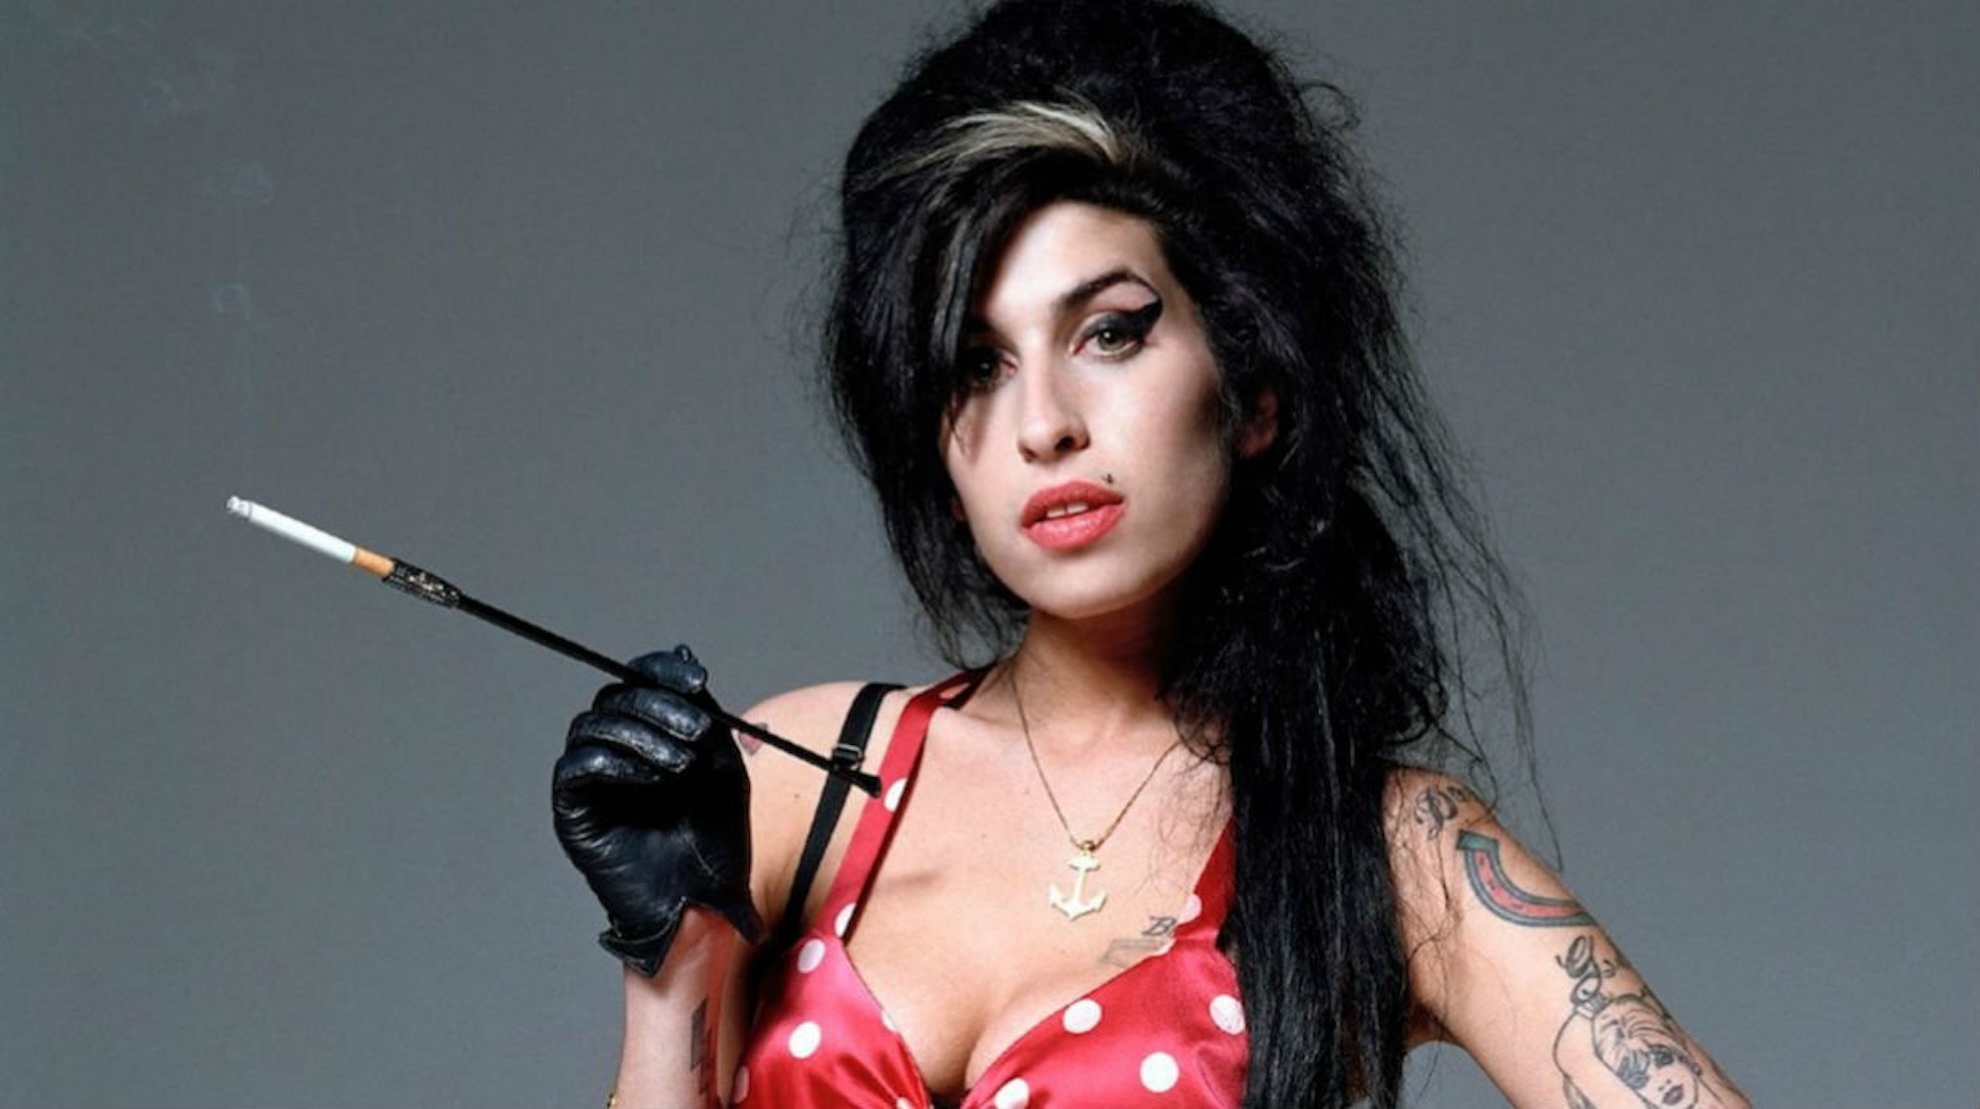 Police investigating incident after Amy Winehouse statue covered with Palestine flag sticker